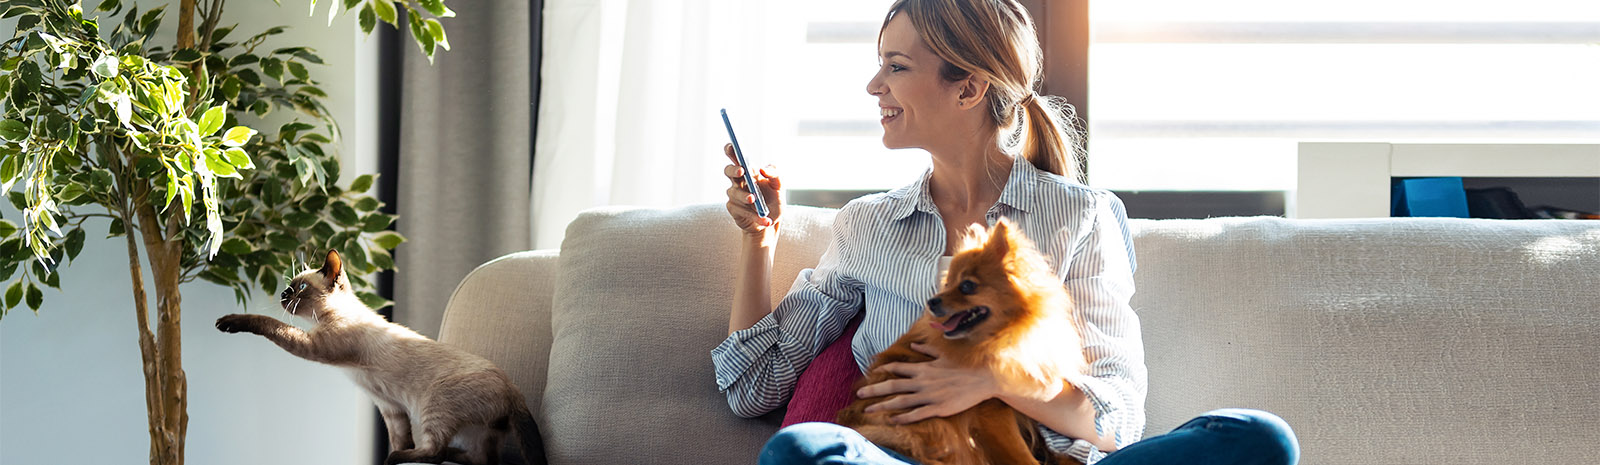 IMAGE: Woman with phone on couch holding small dog, looking at cat.